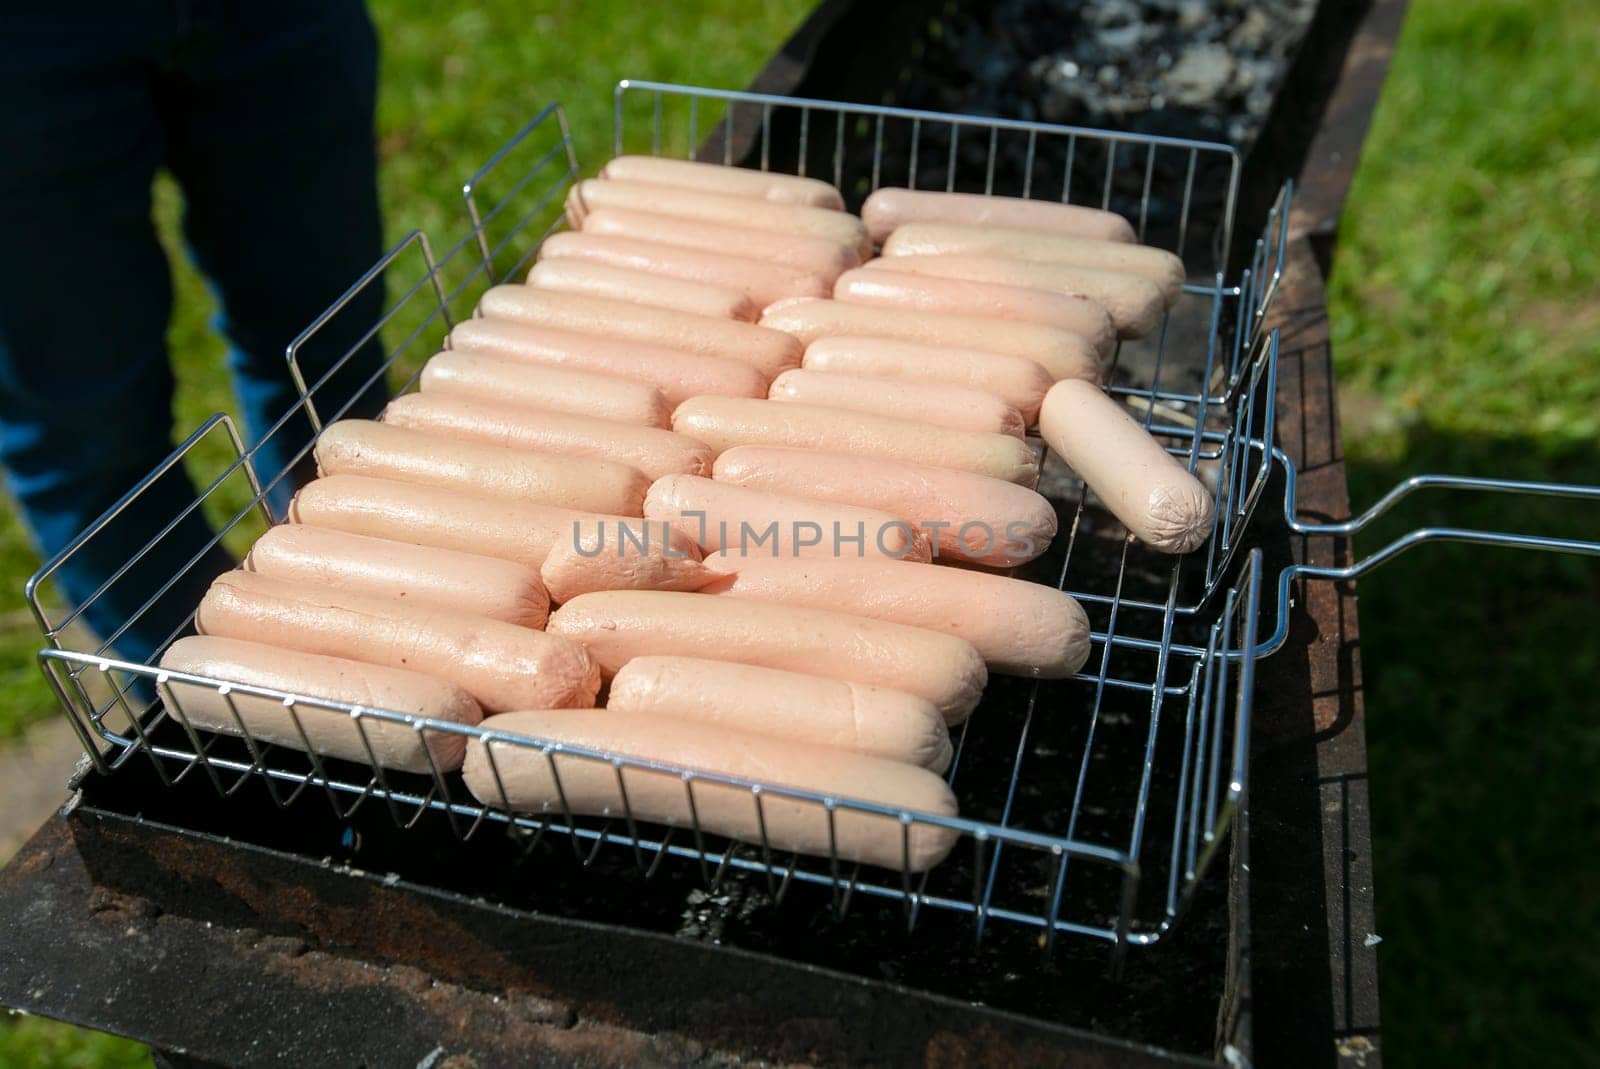 A lot of sausages are grilled on a barbecue grill for a buffet table. by Sviatlana